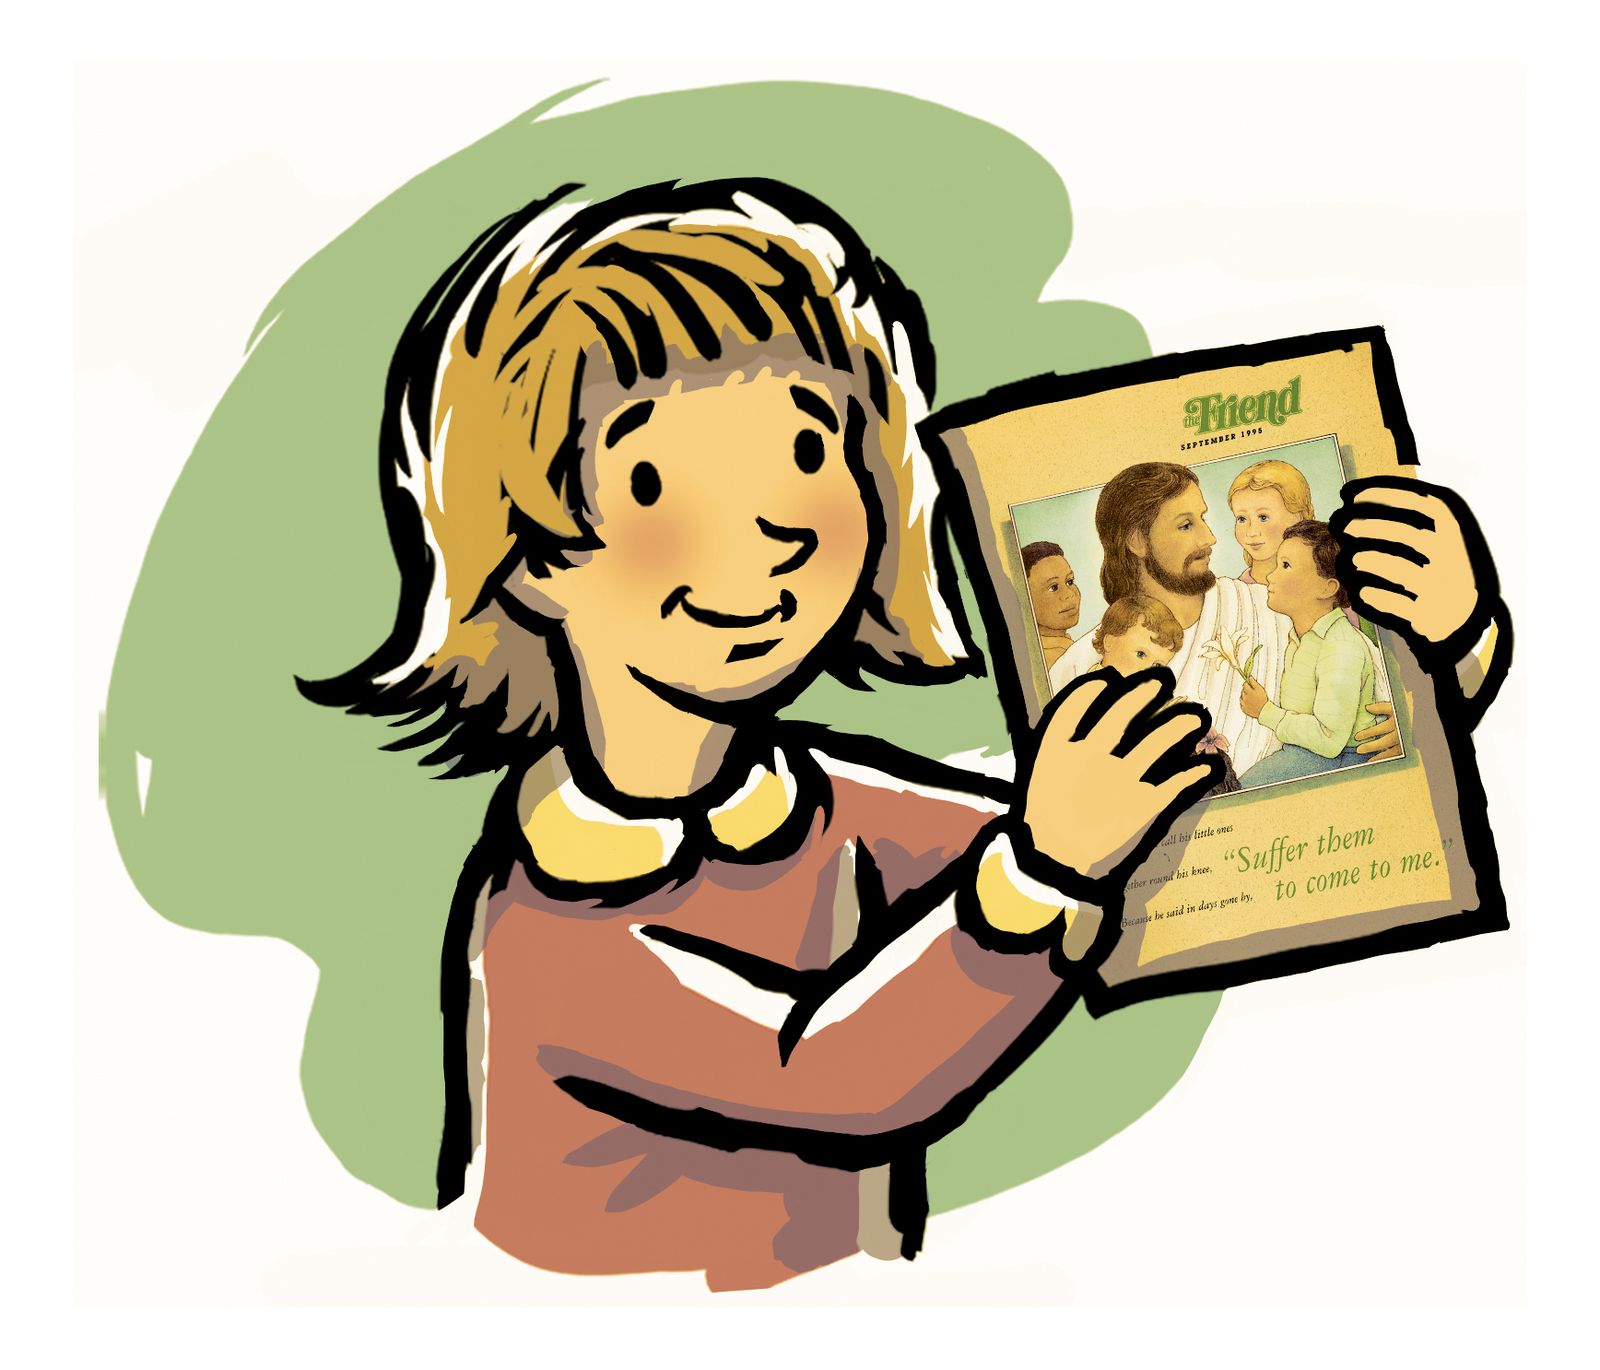 A young girl smiles and holds the Friend magazine in her hands.